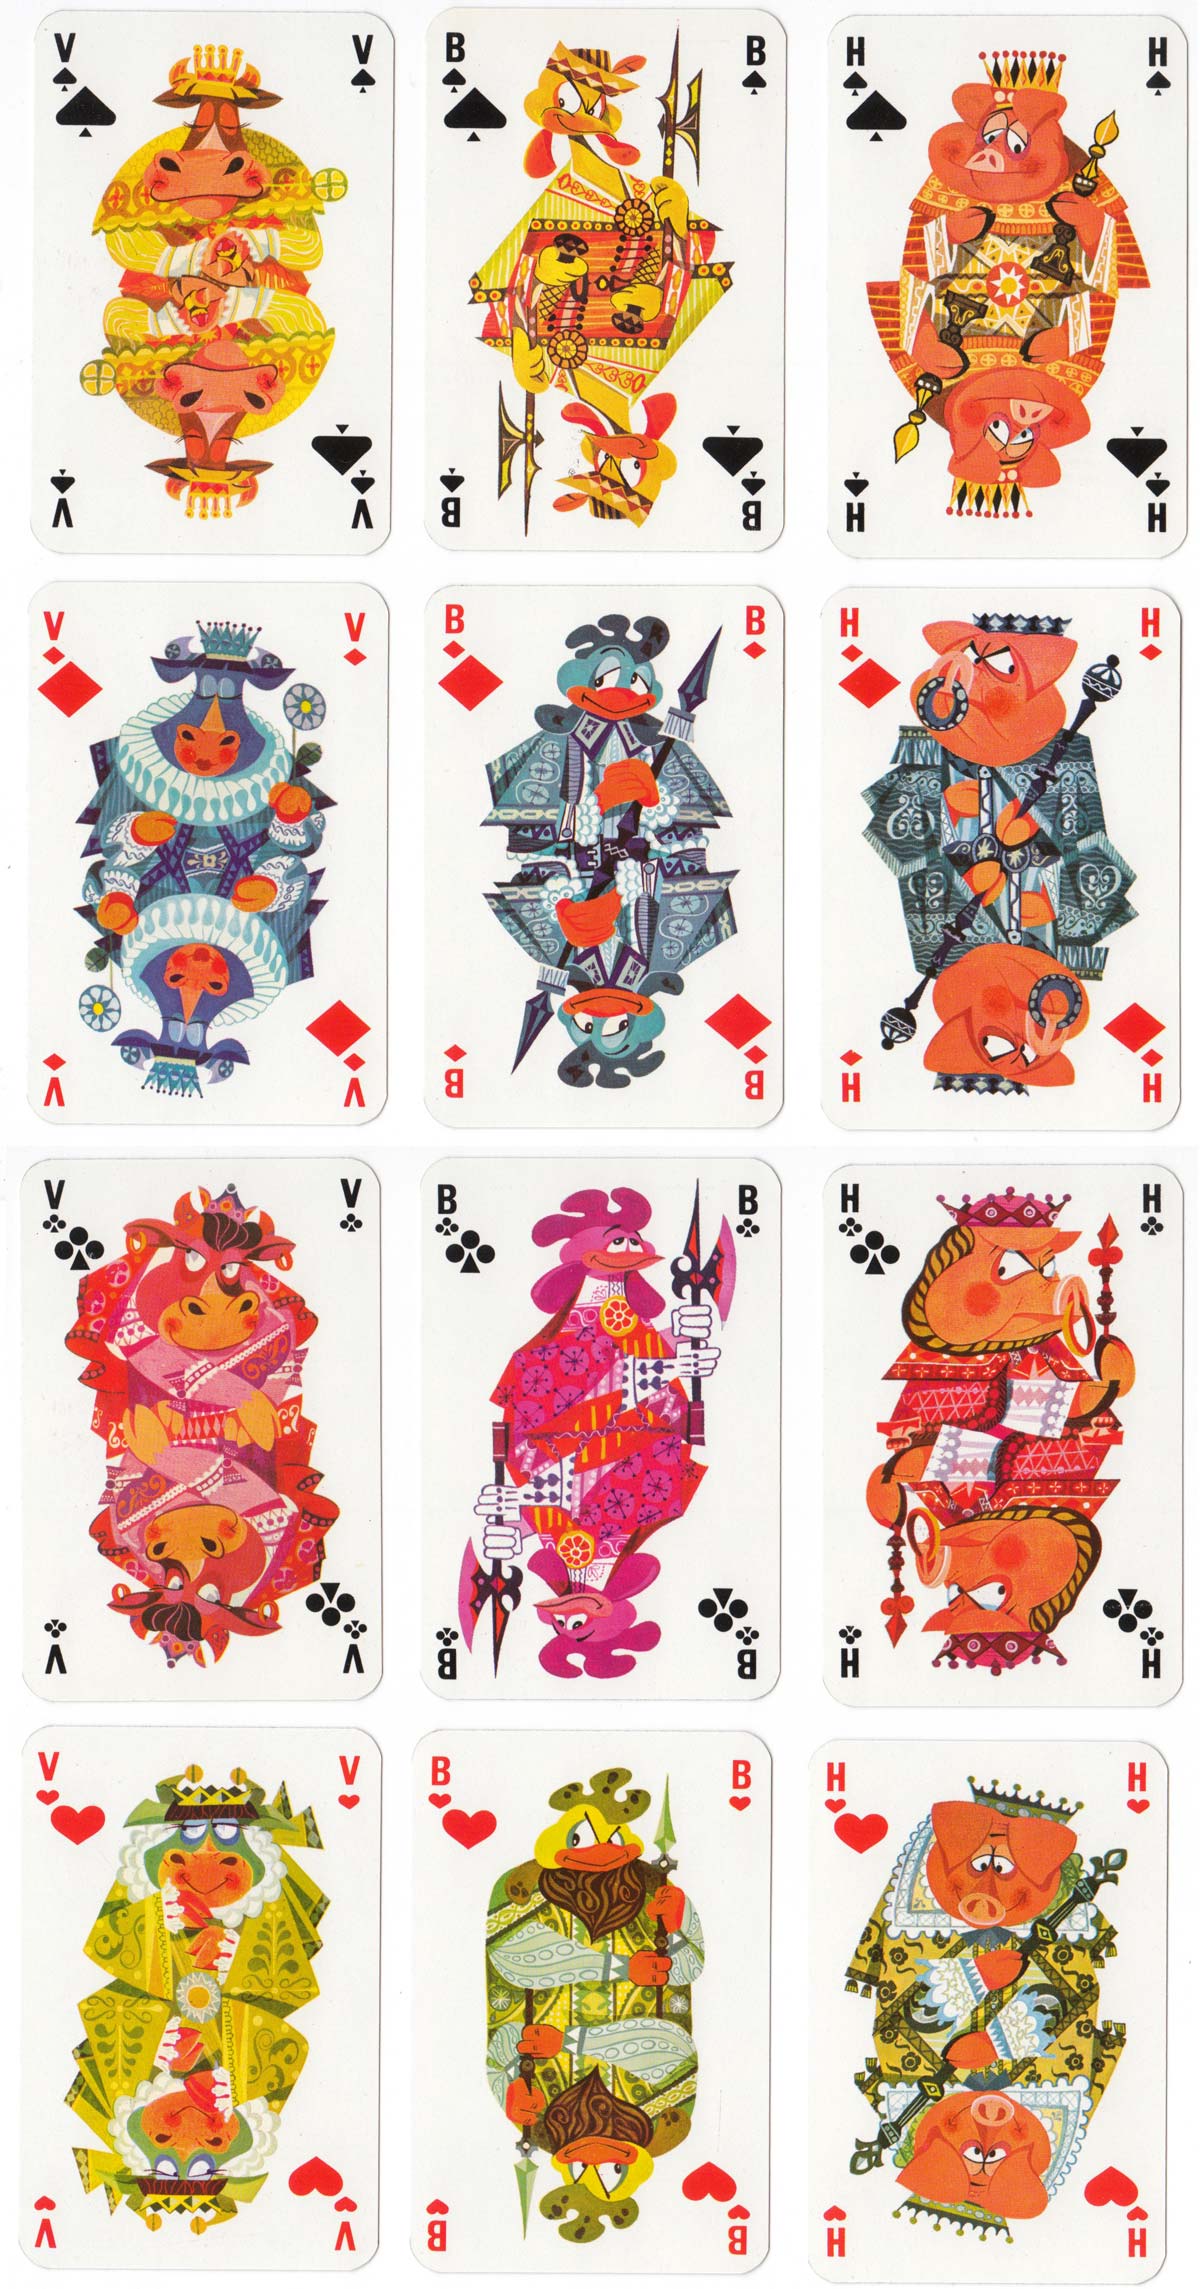 Promotional deck designed by Ray Goossens for Boerenbond farmers’ association, c.1968